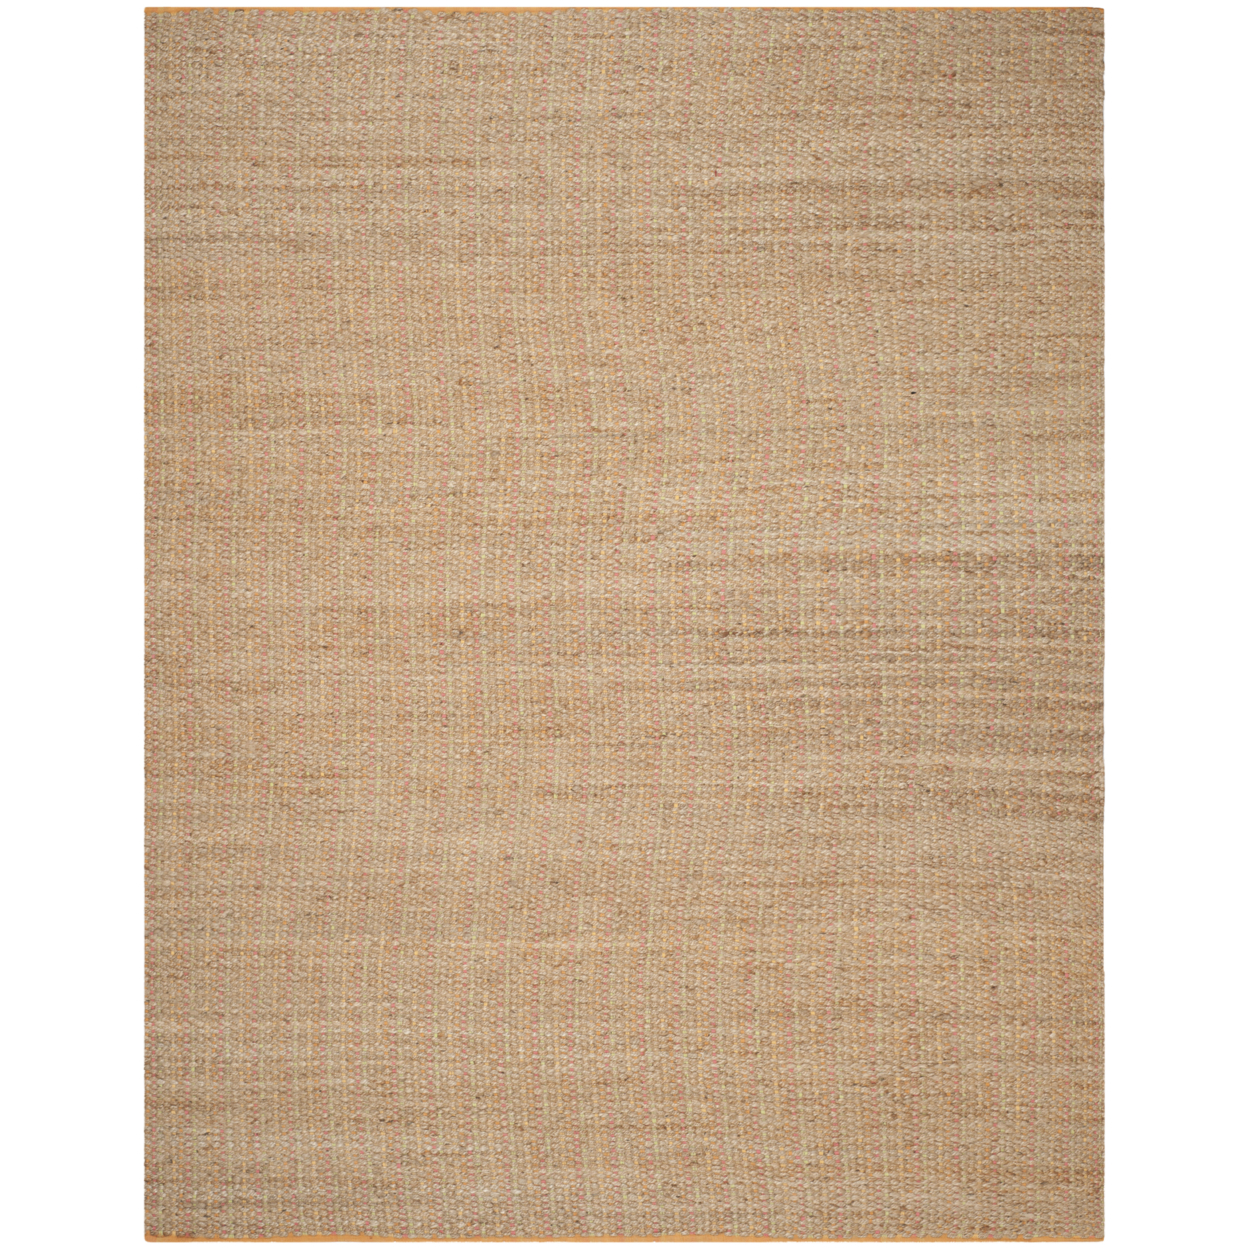 SAFAVIEH Cape Cod Collection CAP811D Handwoven Spring Rug - 9' X 12'